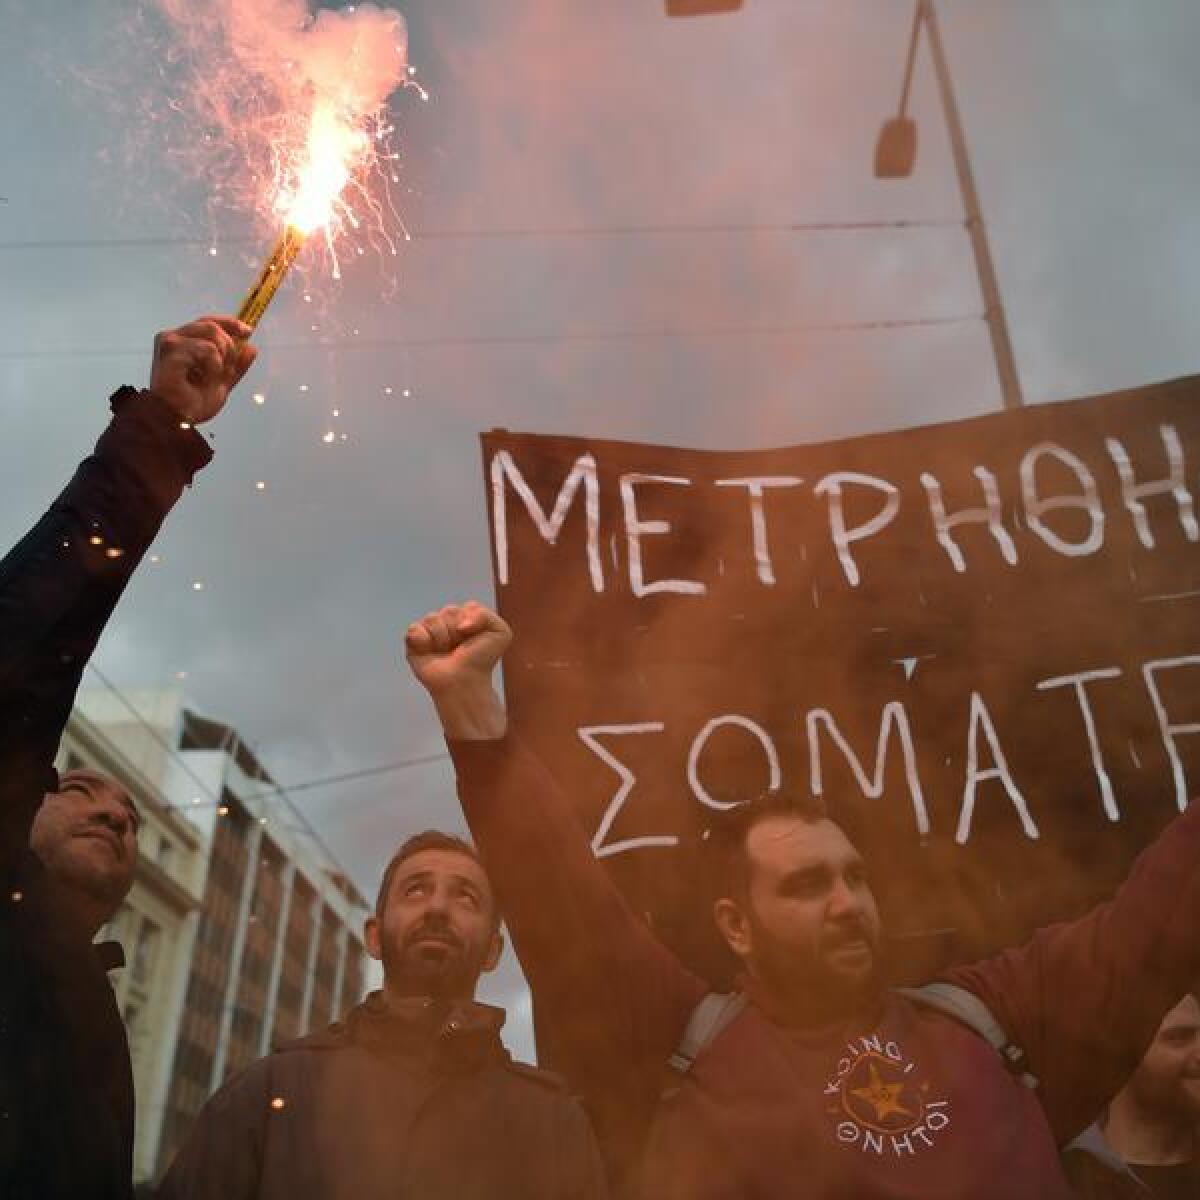 A protester holds a smoke flare during a rally in Athens, Greece